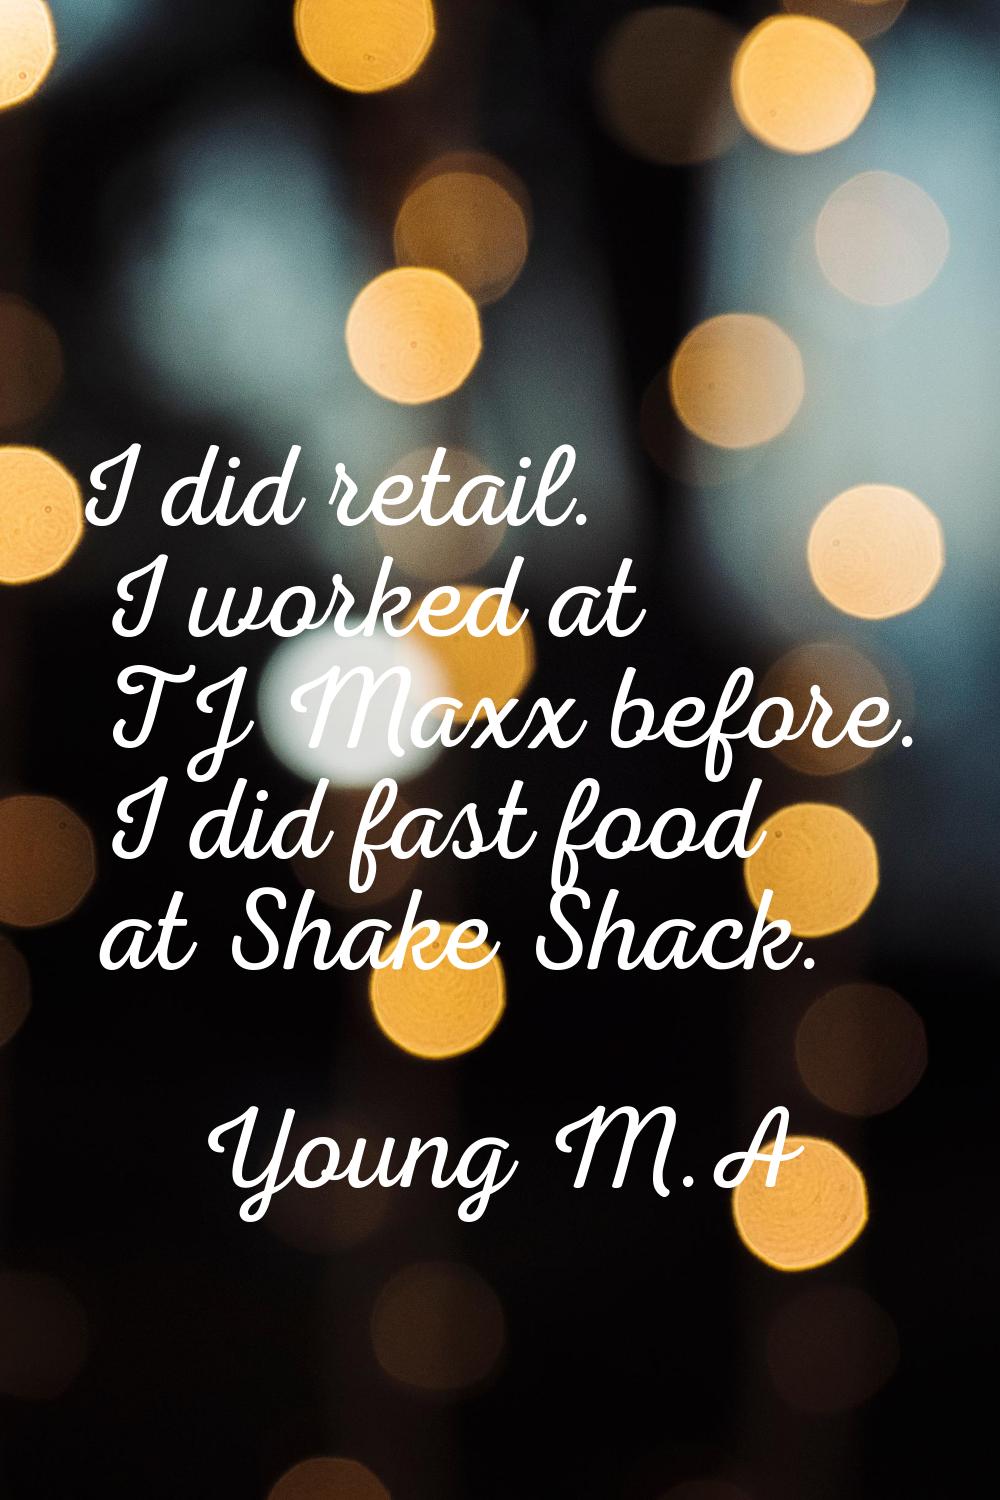 I did retail. I worked at TJ Maxx before. I did fast food at Shake Shack.